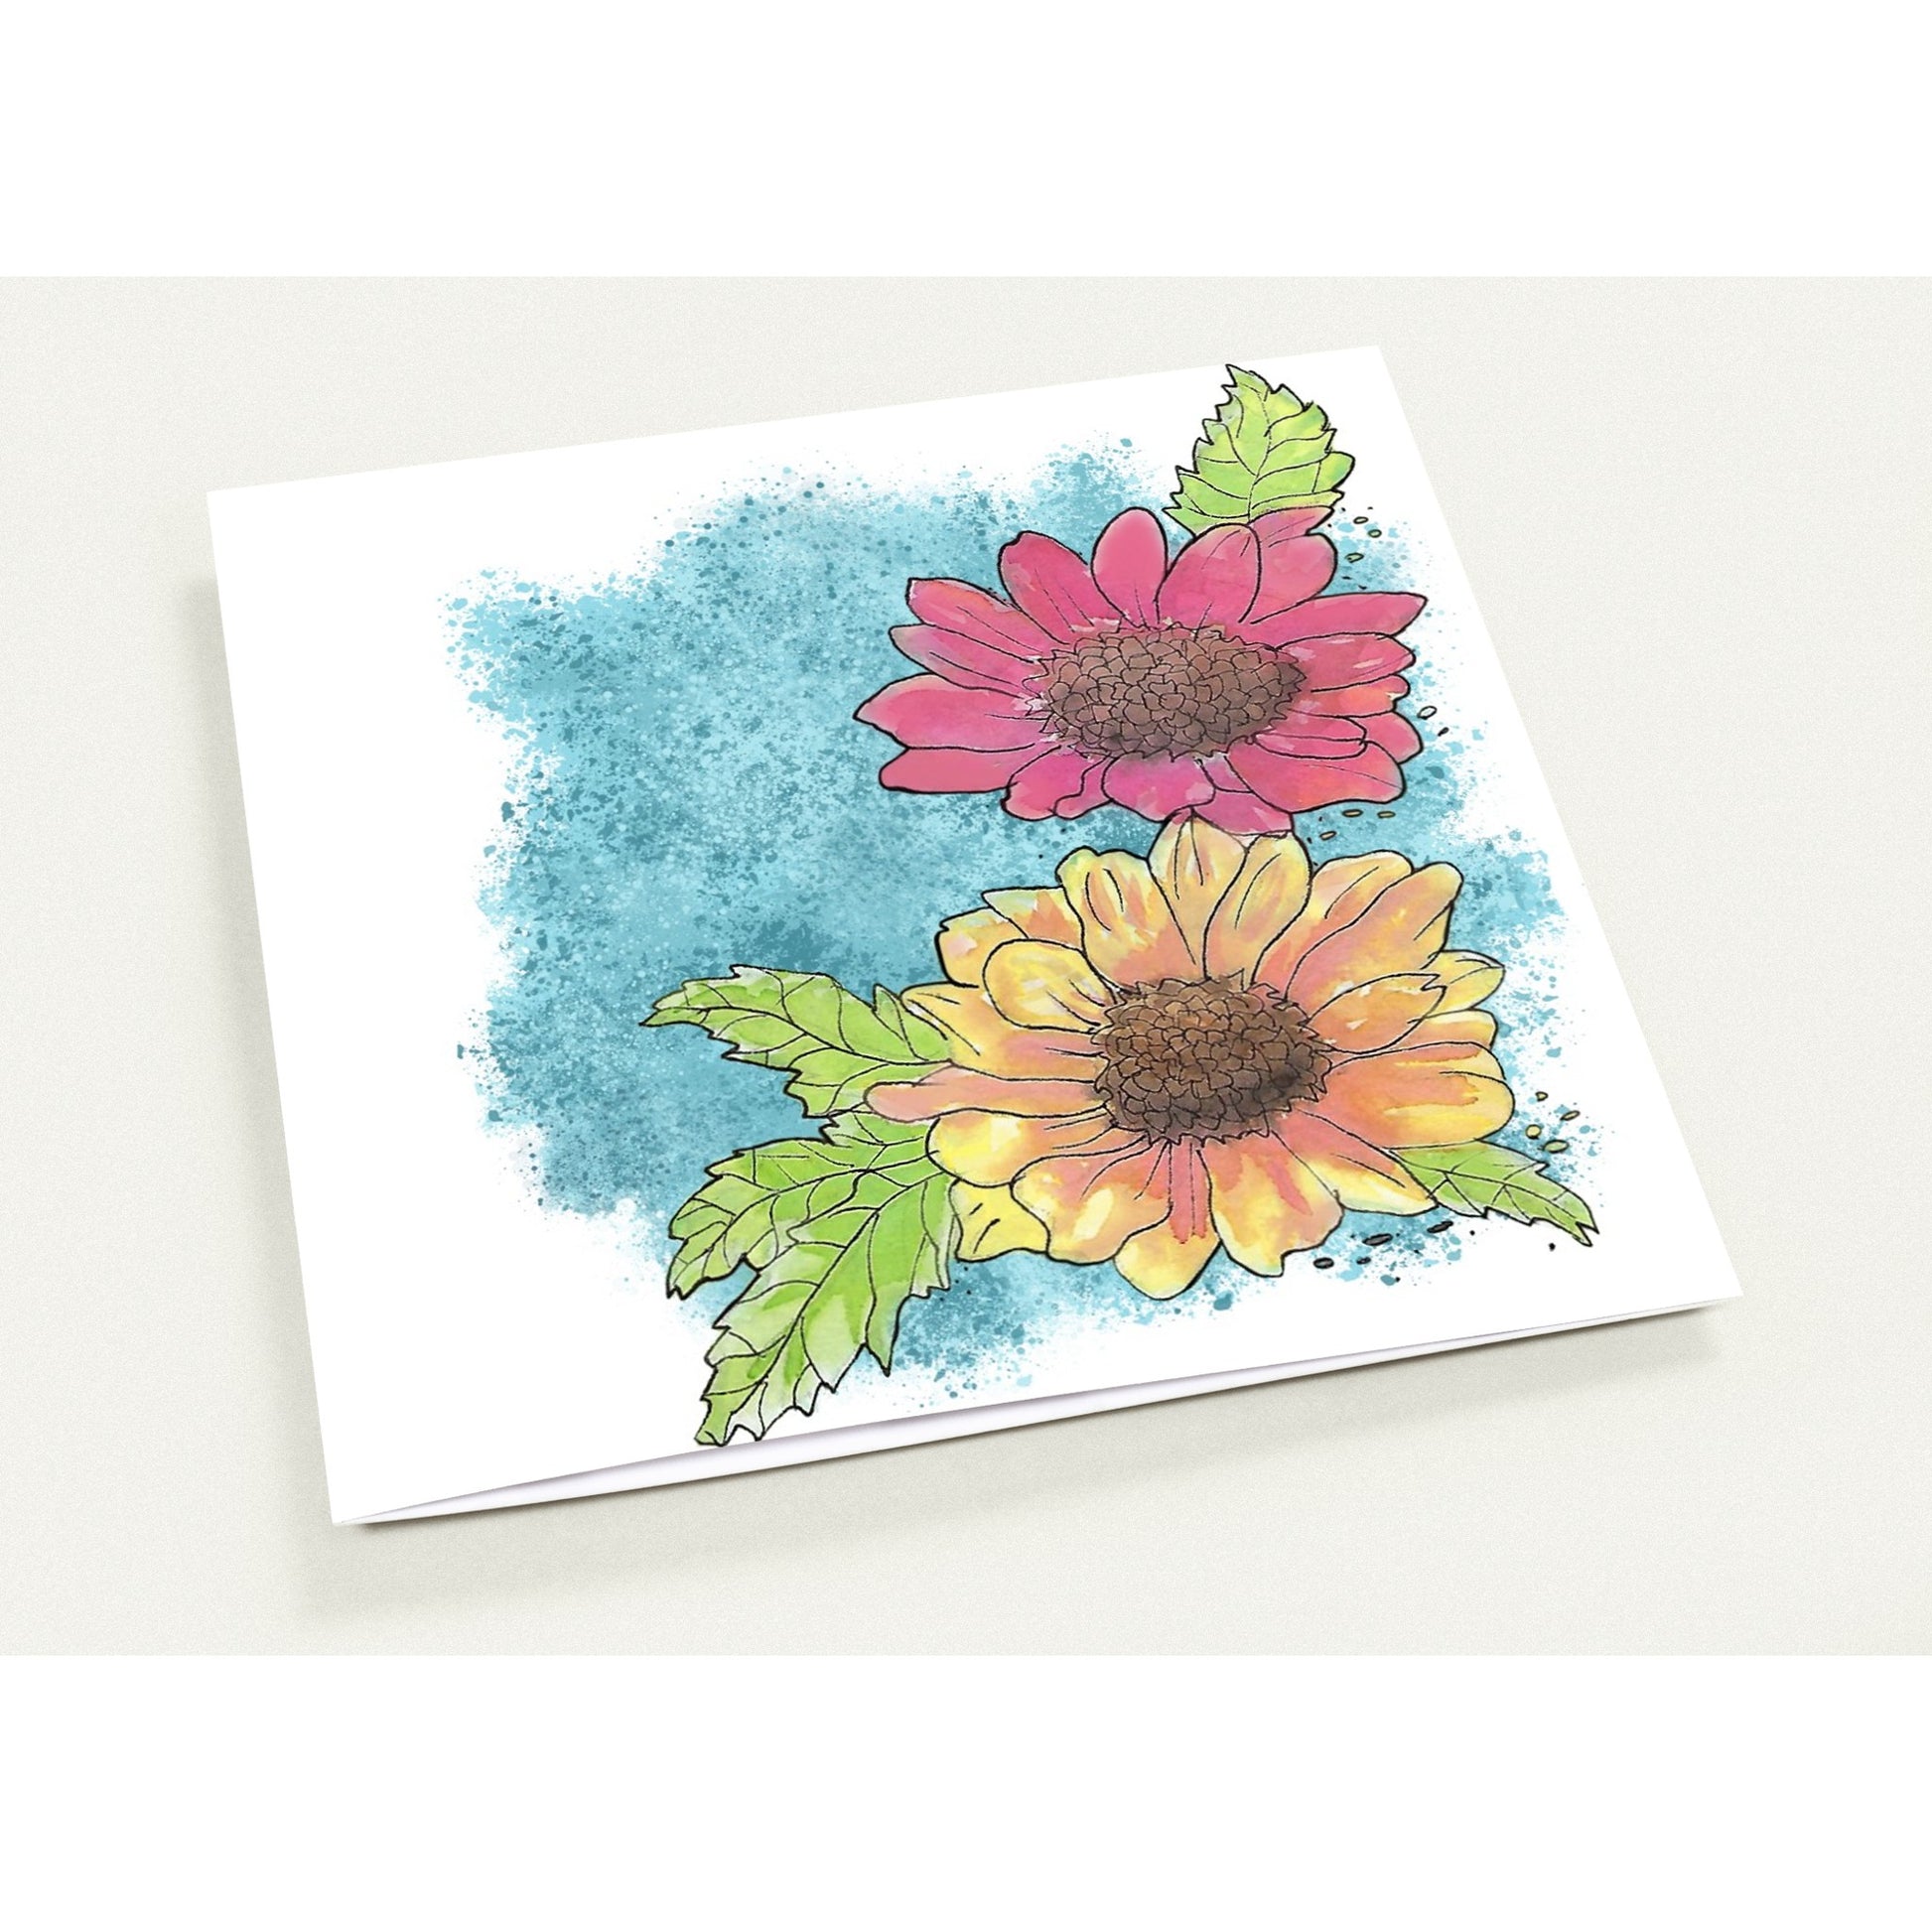 5.25 by 5.25 inch Gerber daisies set of 10 greeting cards and 10 envelopes. Printed on glossy paperboard. Front has a print of watercolor Gerber daisies on a blue accent. Inside has a blue watercolor border with daisy accents.